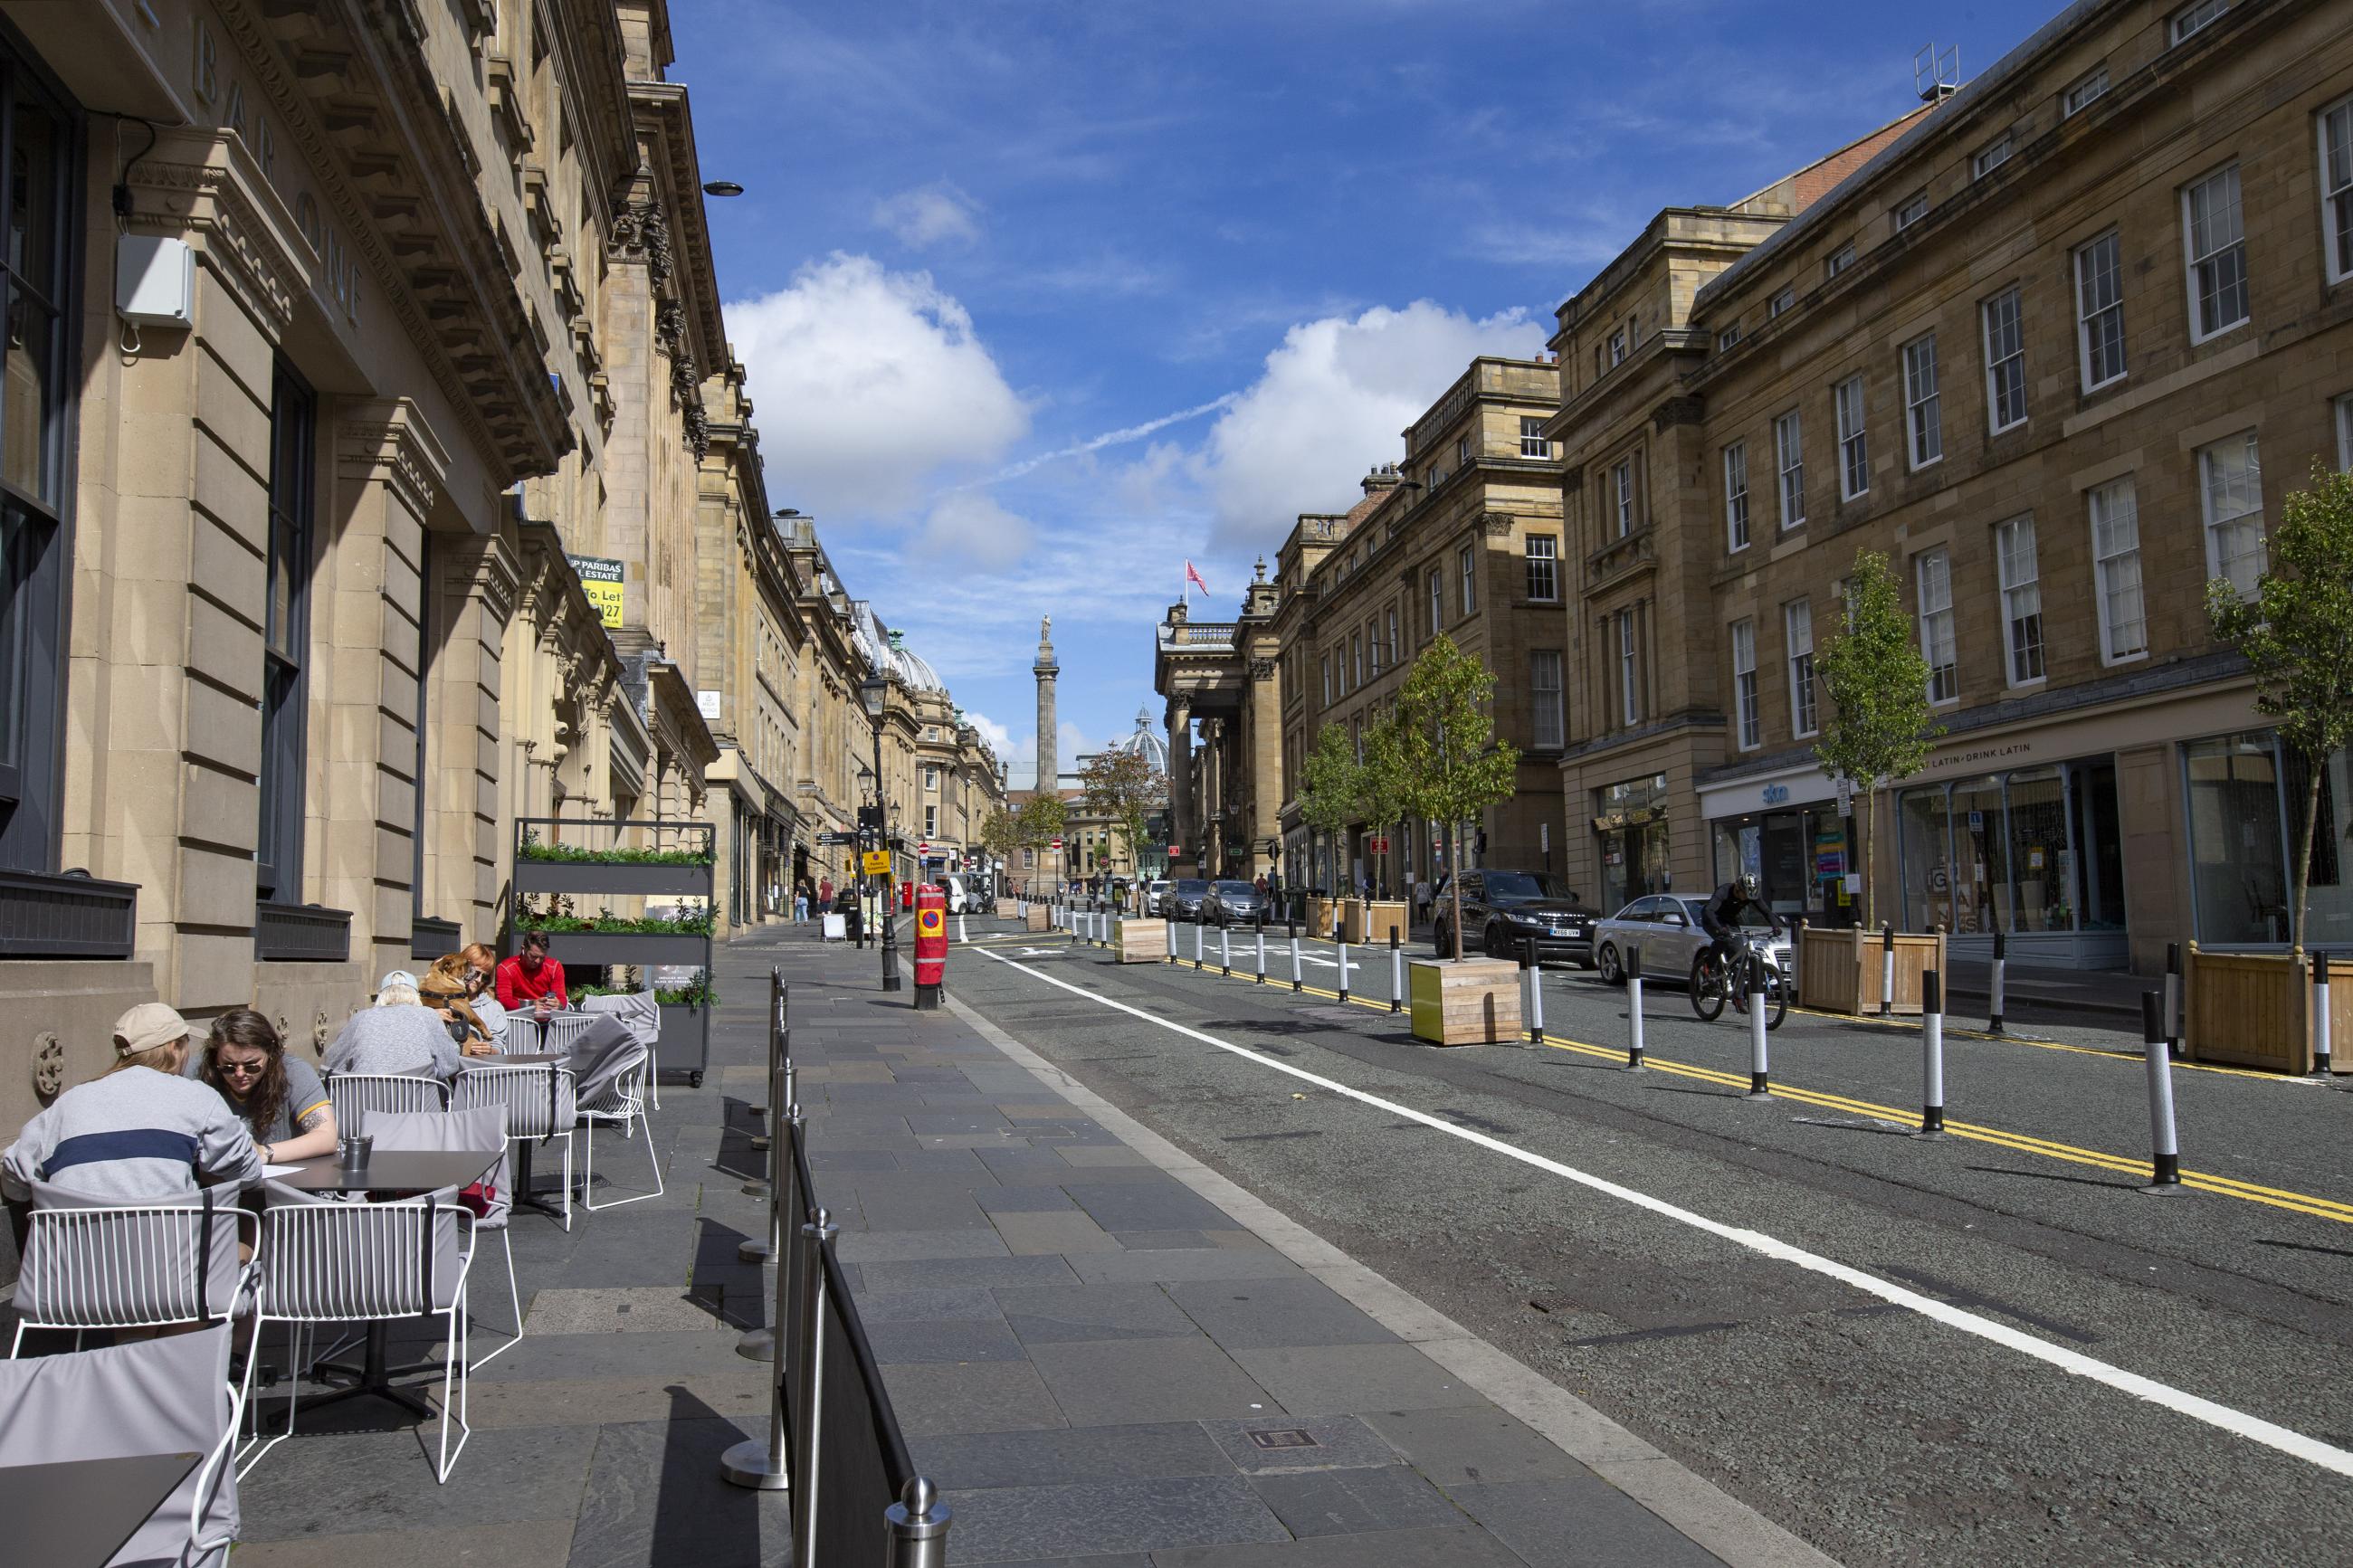 Photo showing Grey Street in Newcastle. There are people sitting at a pavement cafe on the left and part of the road has been sectioned off with temporary bollards to create extra walking space and a cycle lane.